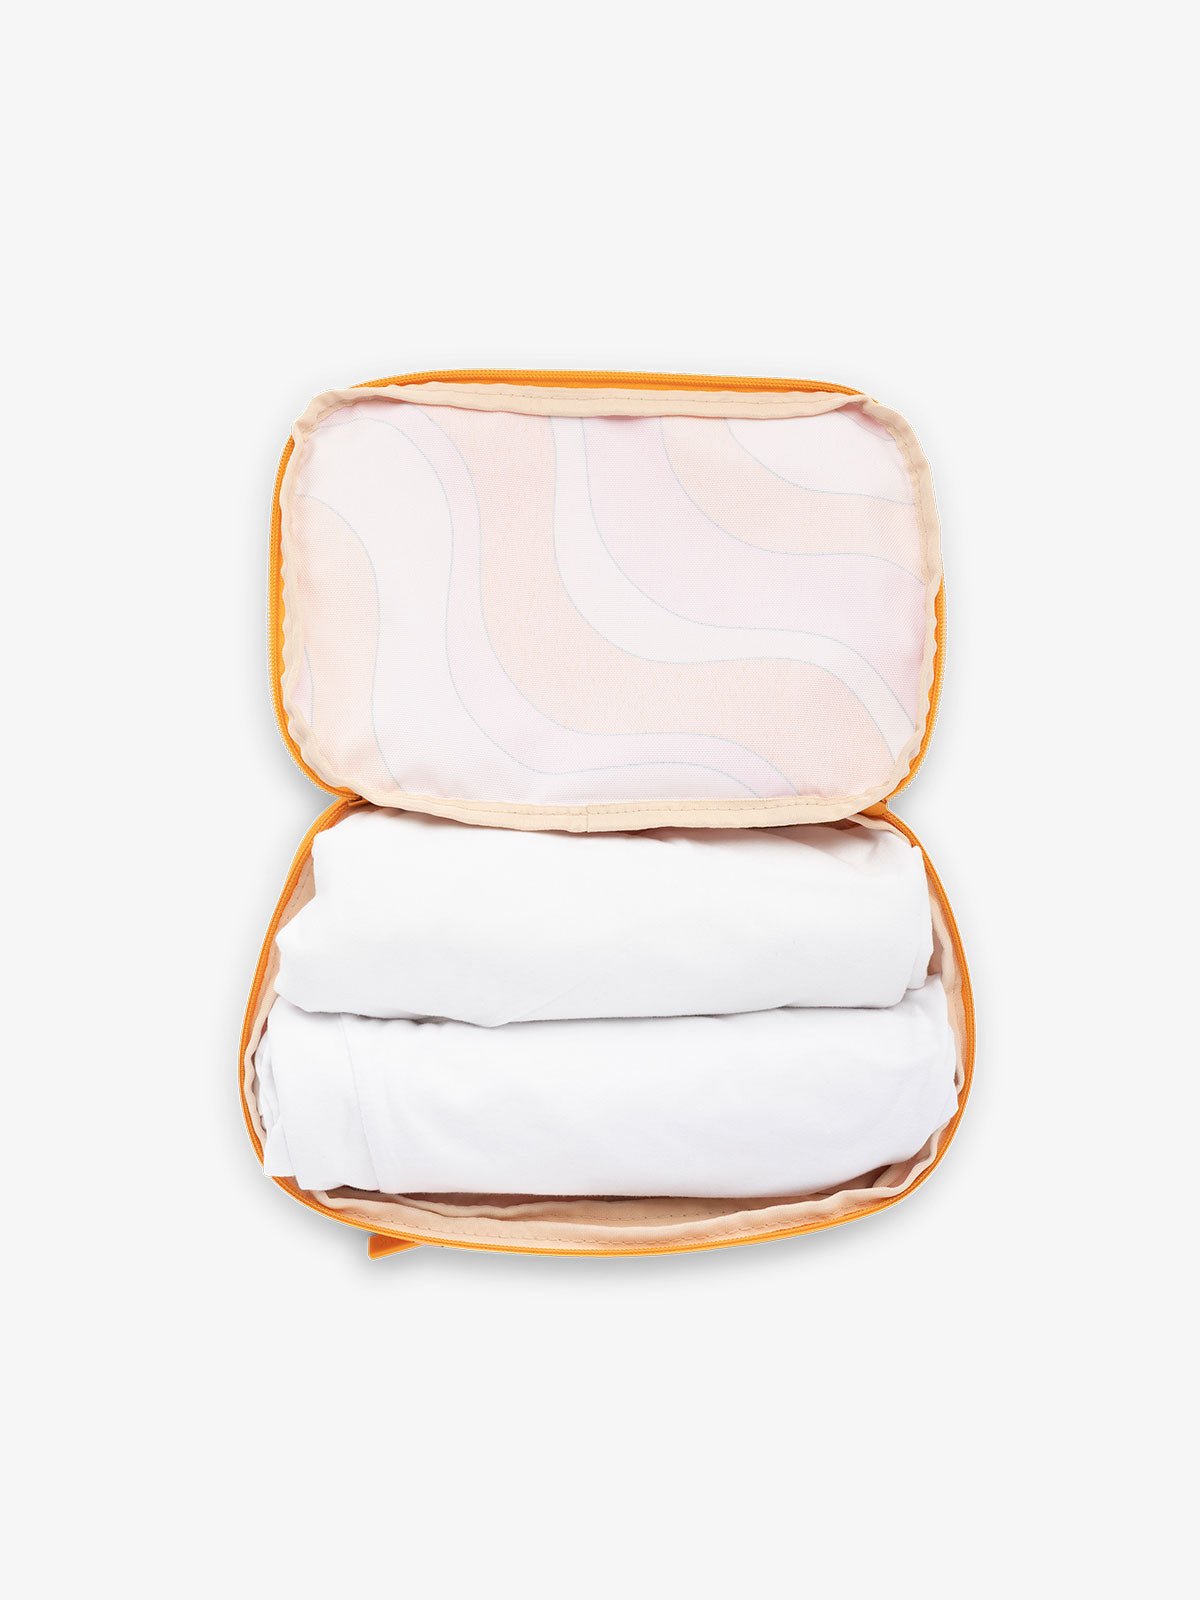 CALPAK small packing cubes for travel made with durable material in retro sunset